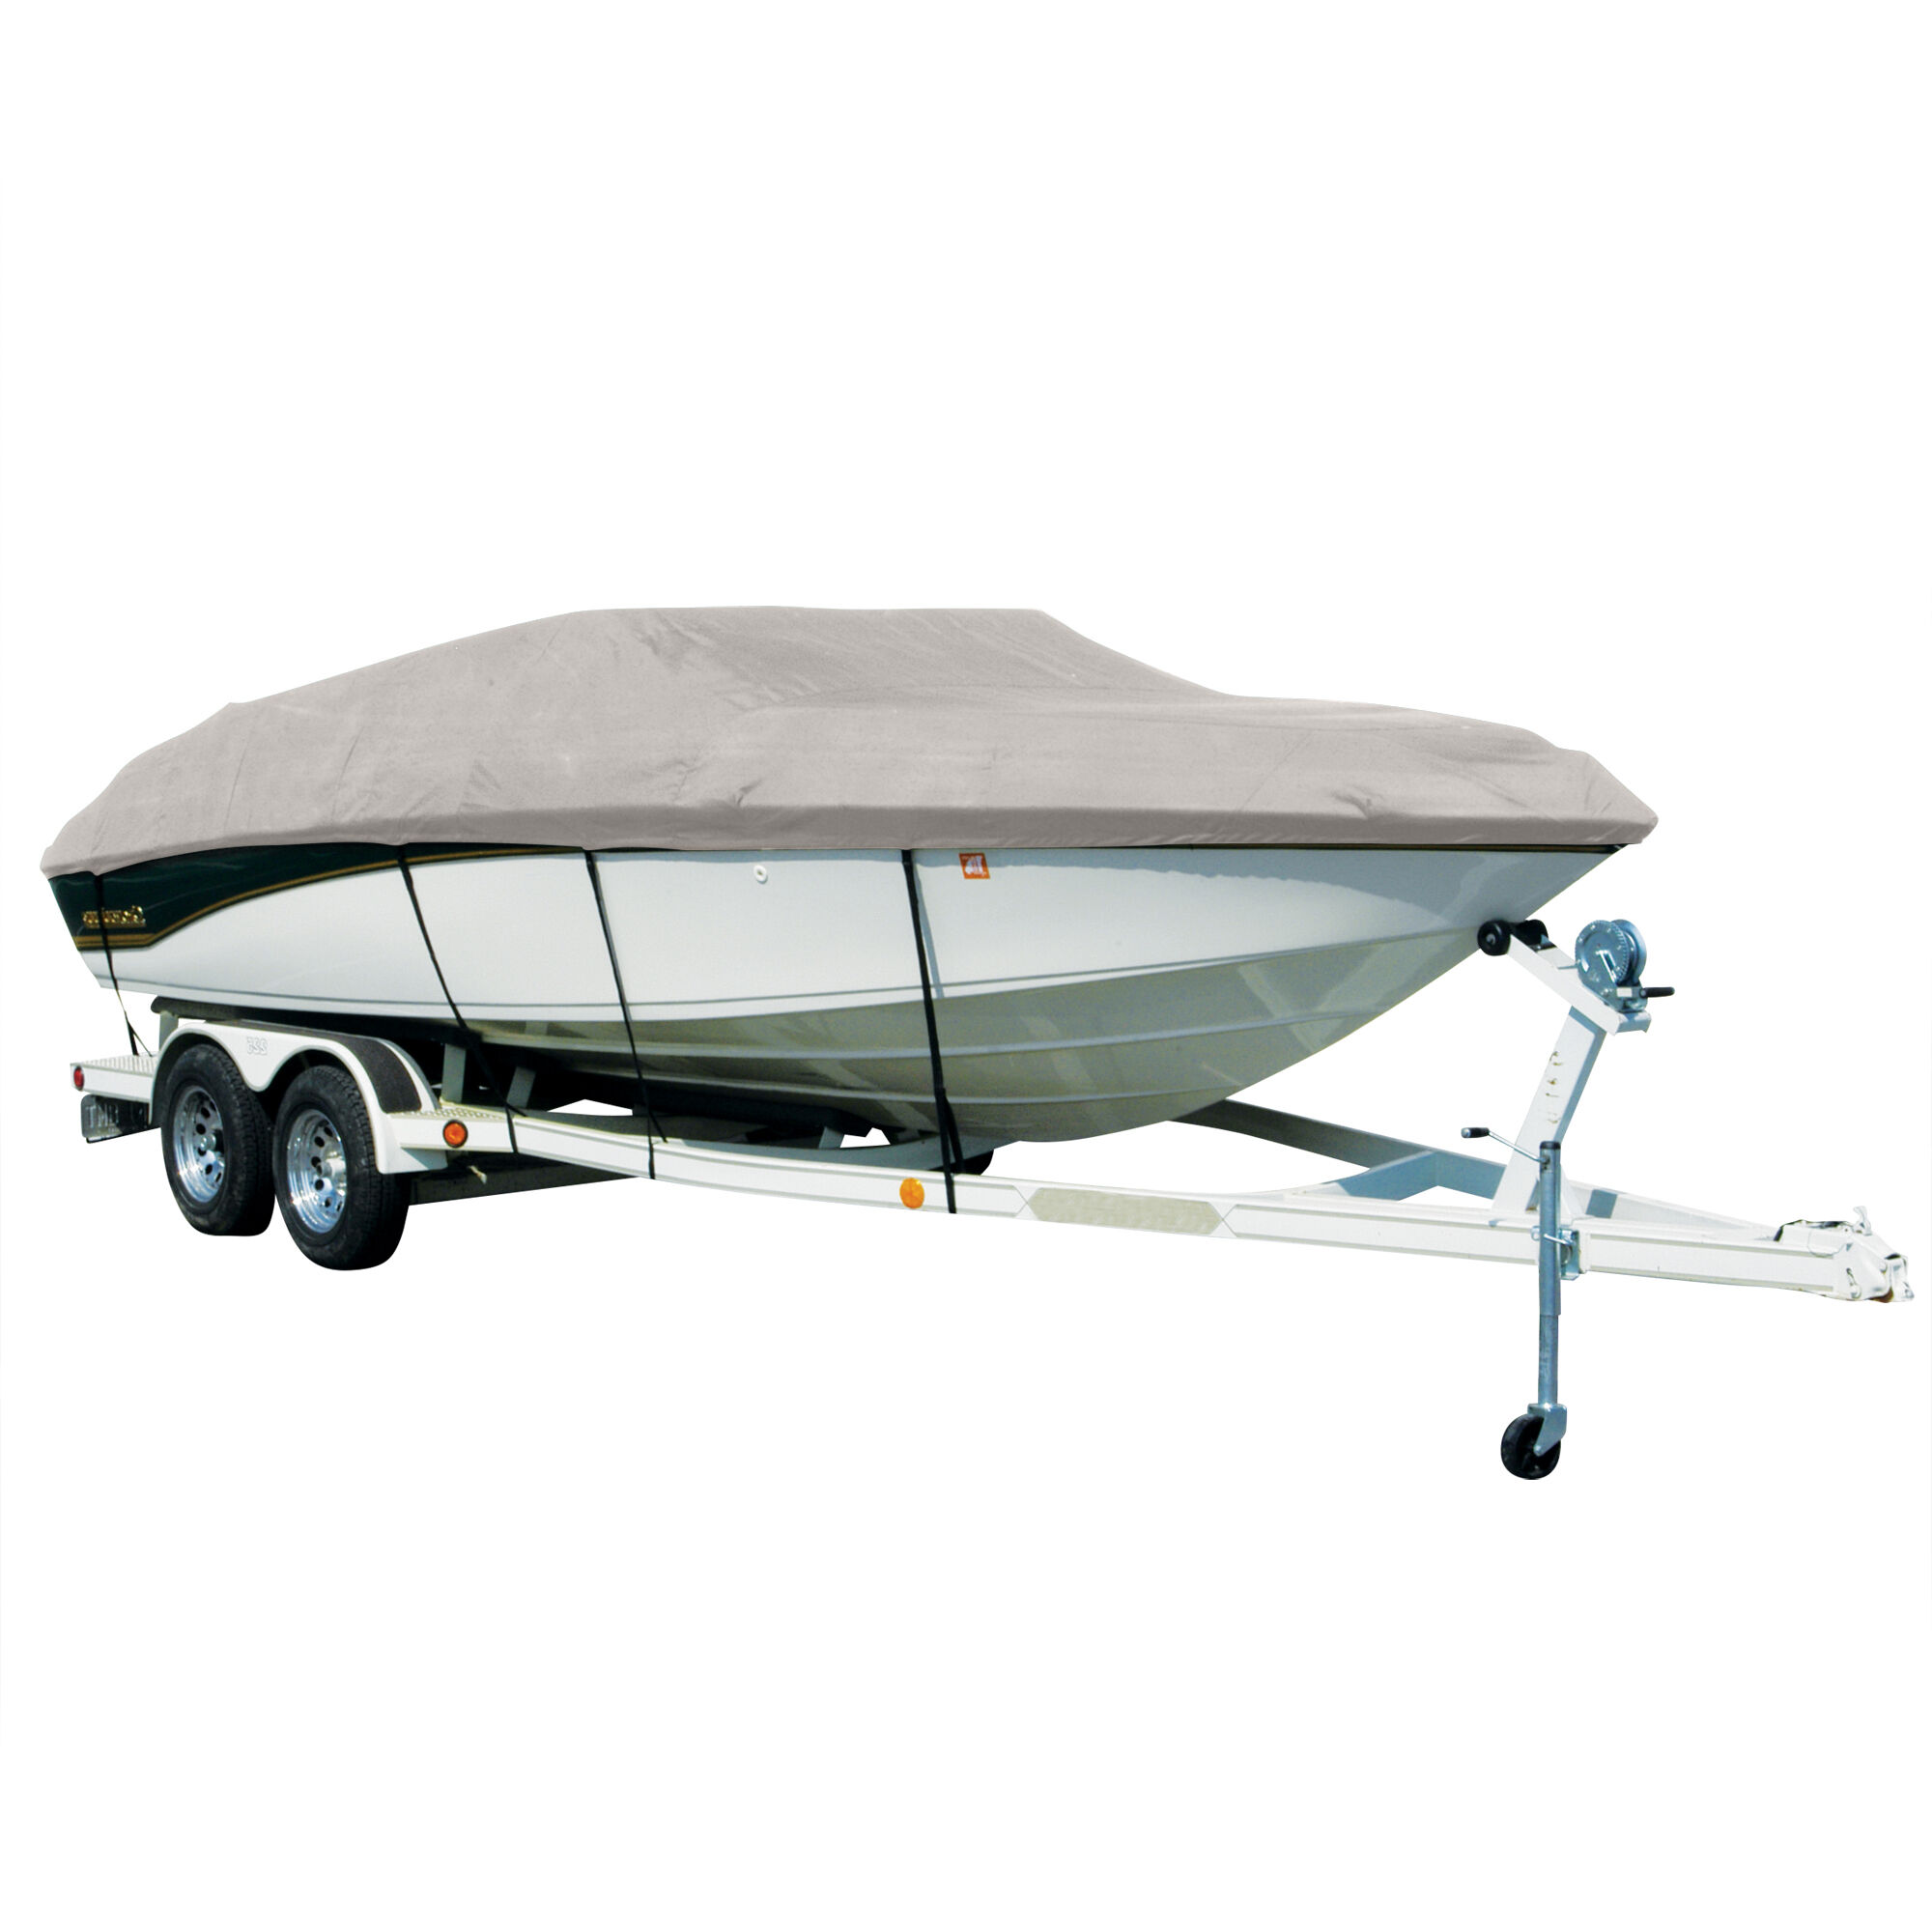 Covermate Exact Fit Sharkskin Boat Cover For Supreme 19 Cs Does Not Cover PLATFORMm in Silver